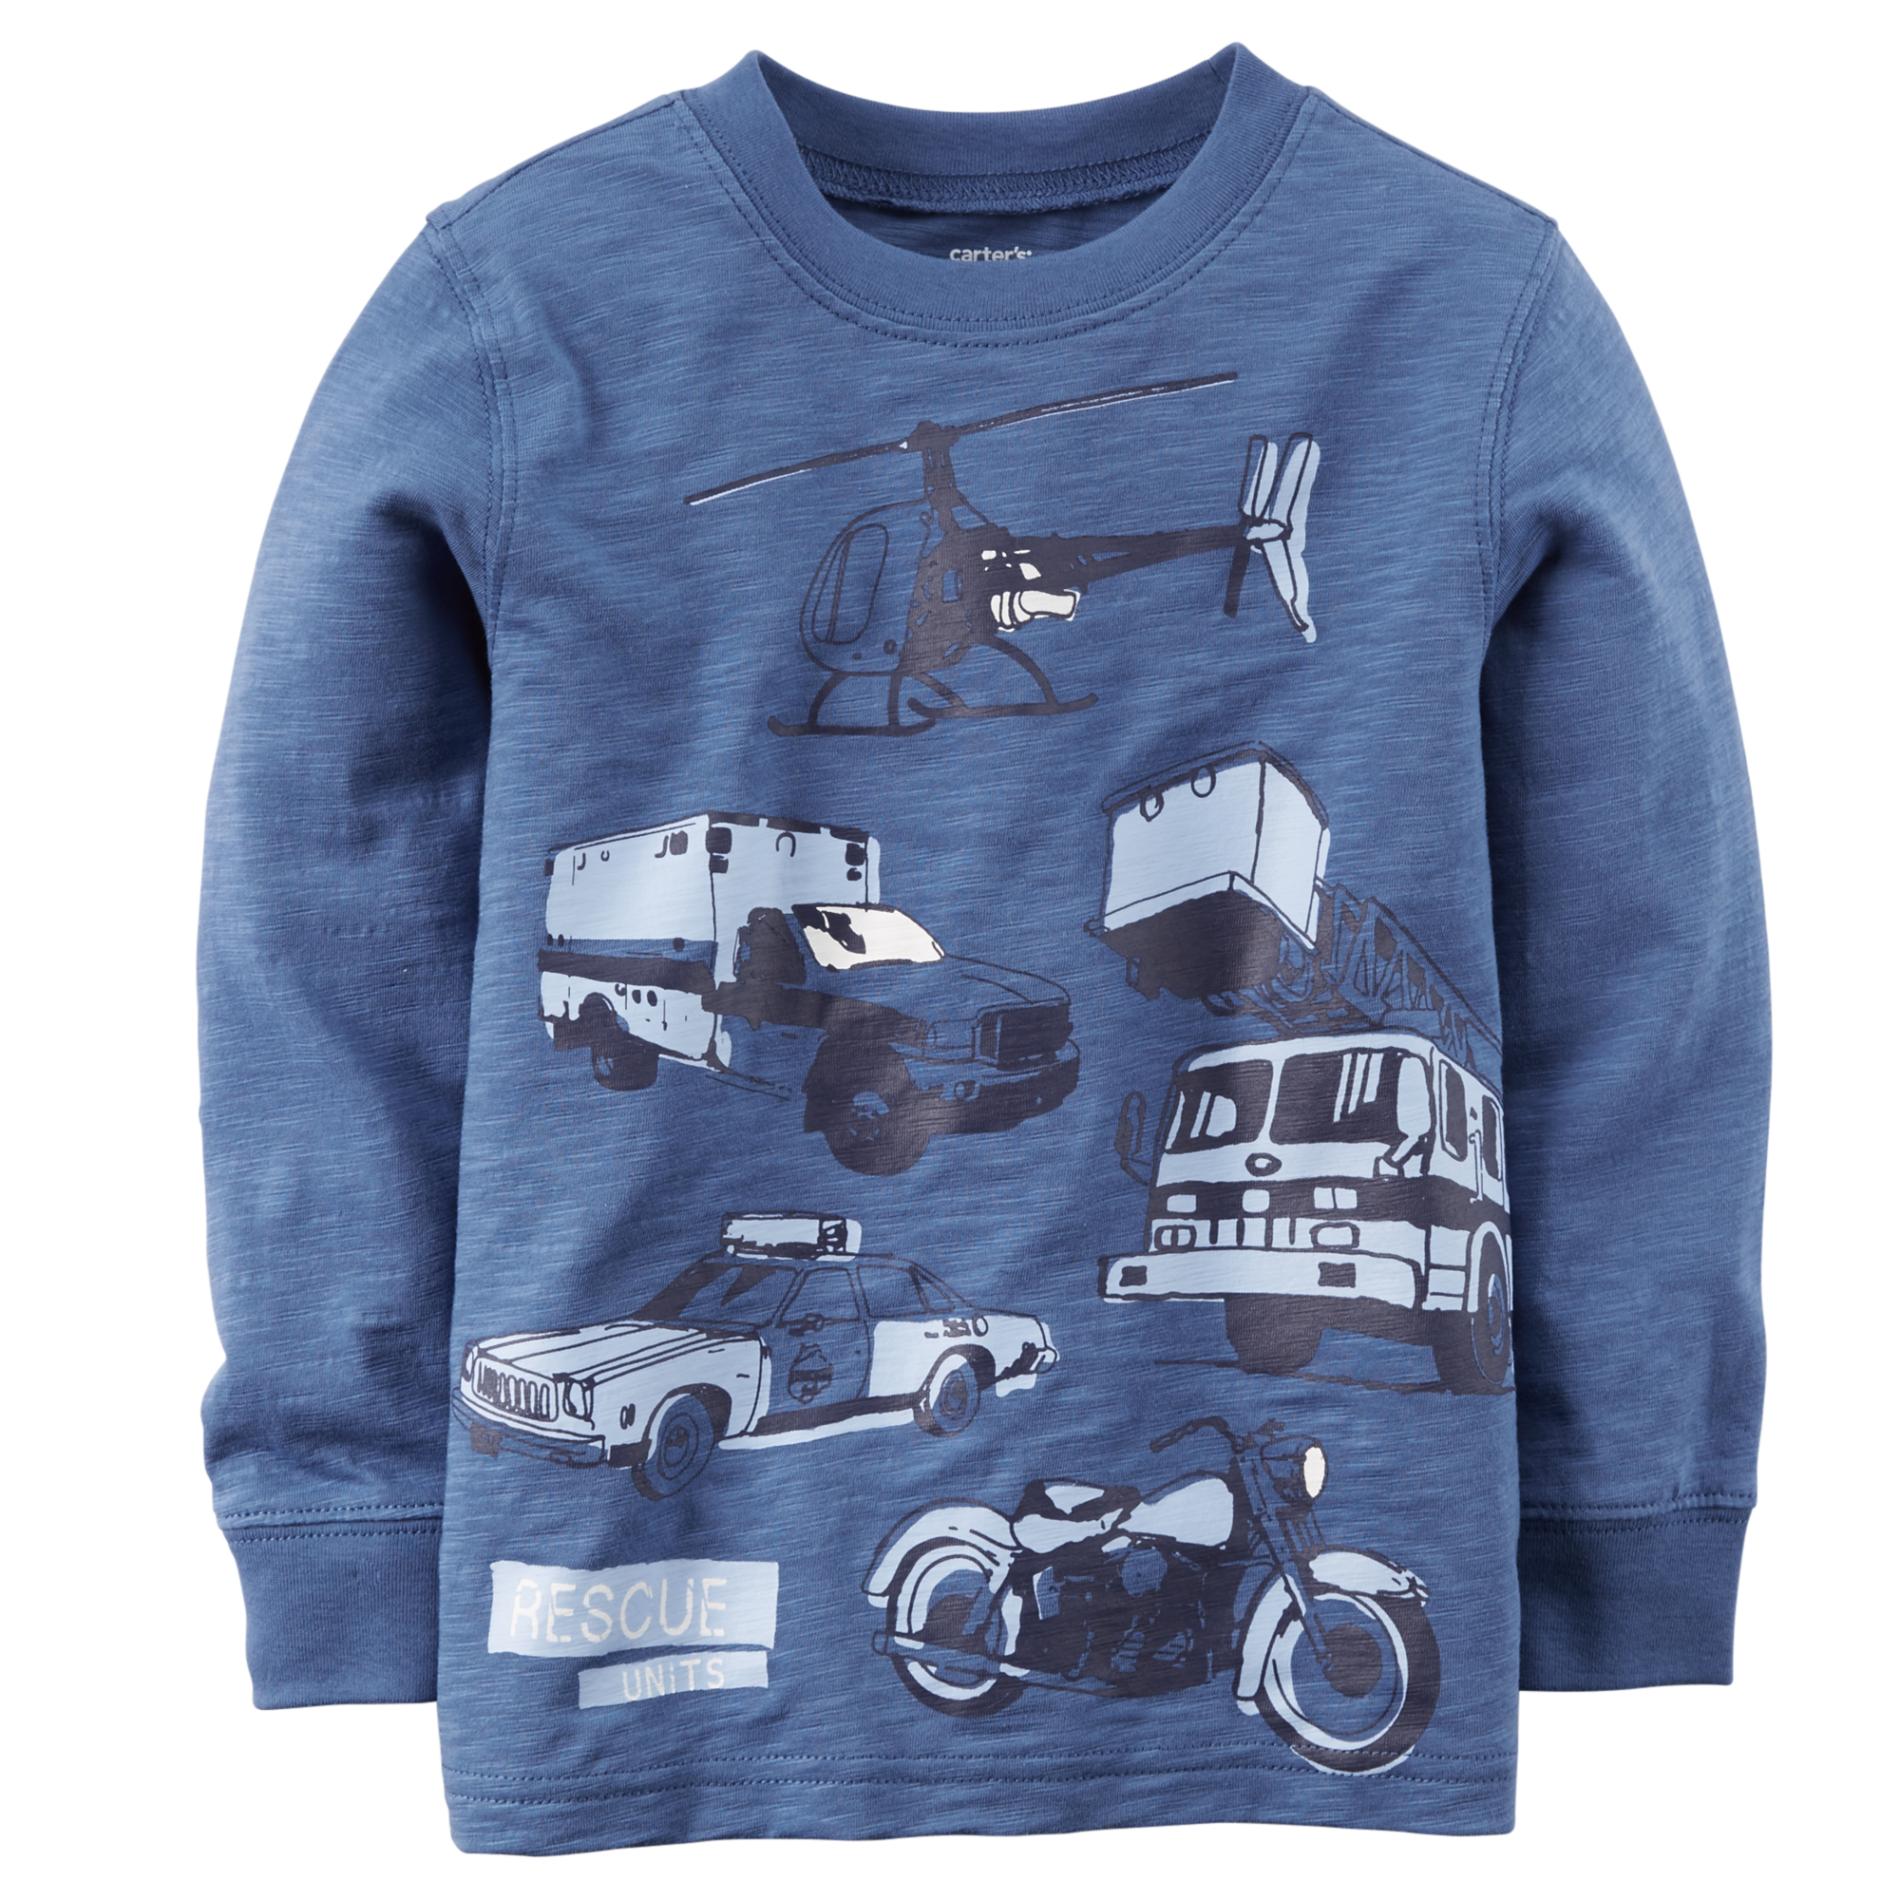 Carter's Boy's Long-Sleeve Graphic T-Shirt - Rescue Vehicles